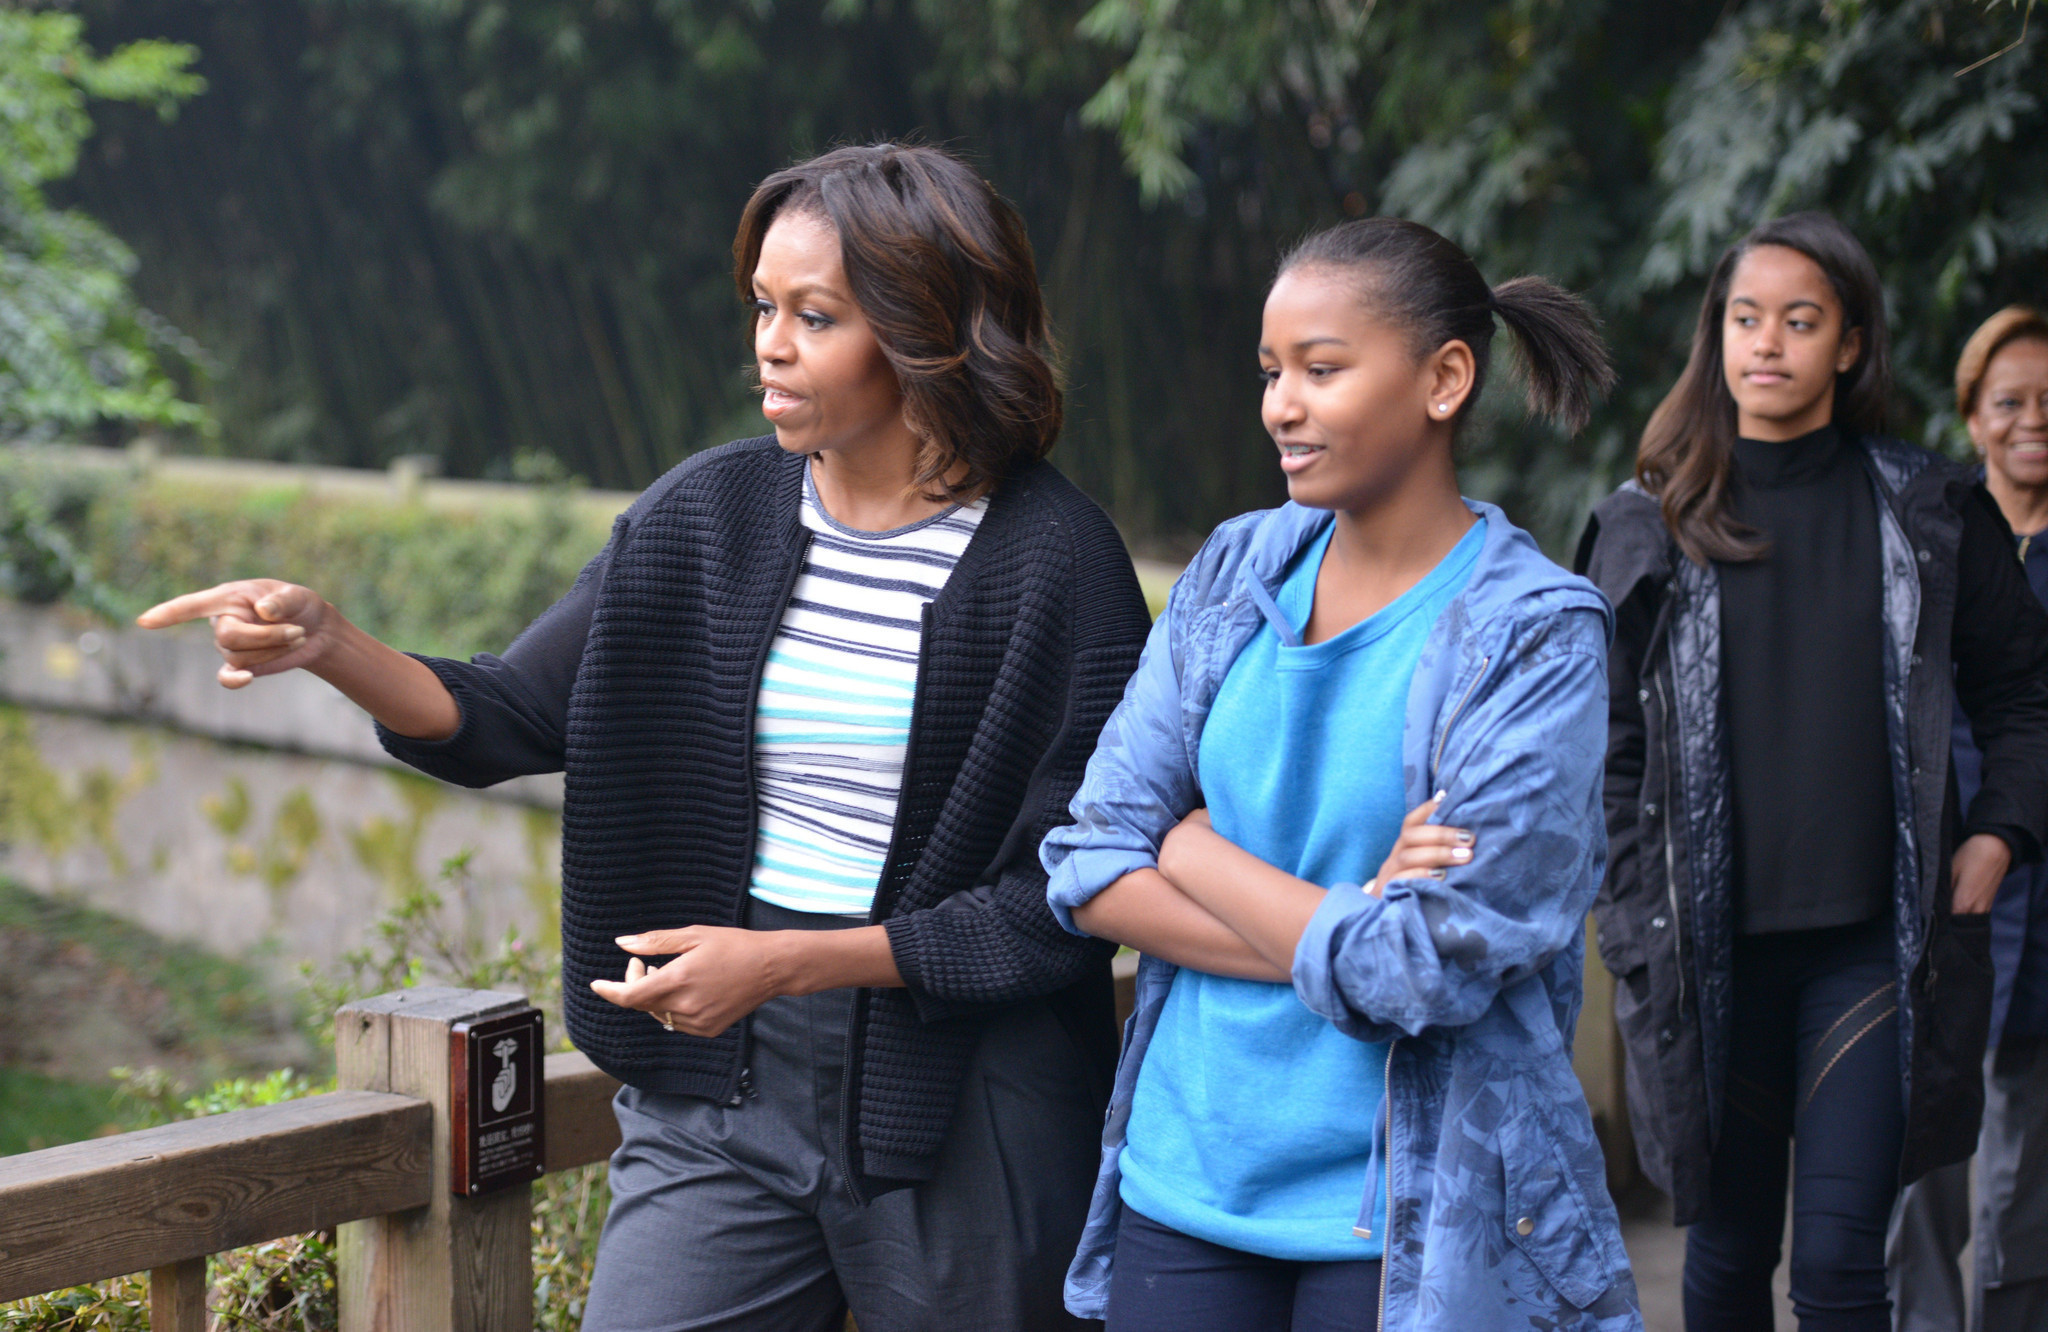 First lady Michelle Obama to travel Europe with mother, daughters - Chicago Tribune